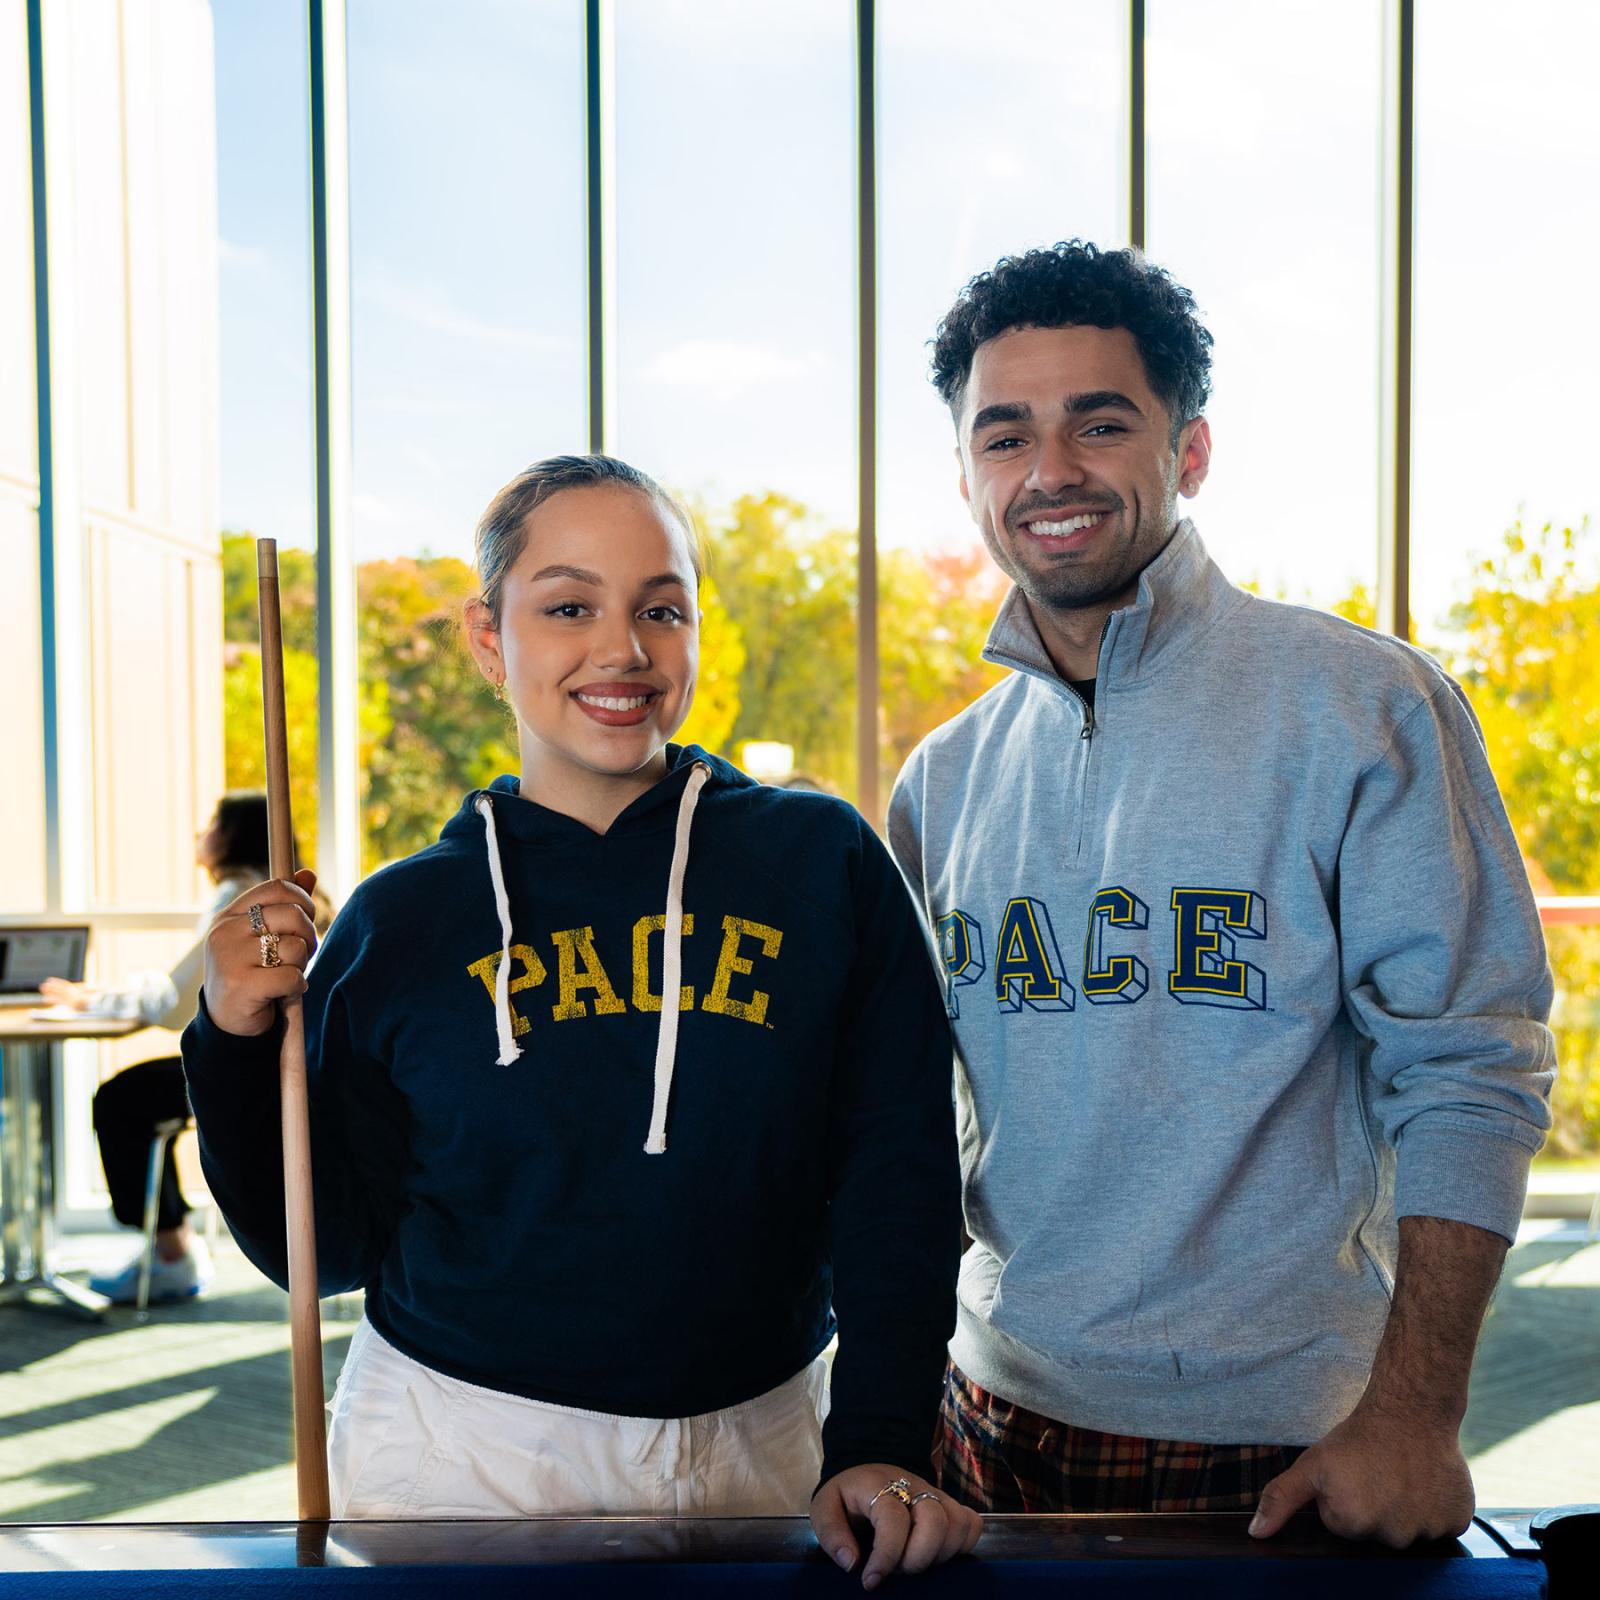 Two Pace students stand in front of a pool table holding one of the sticks